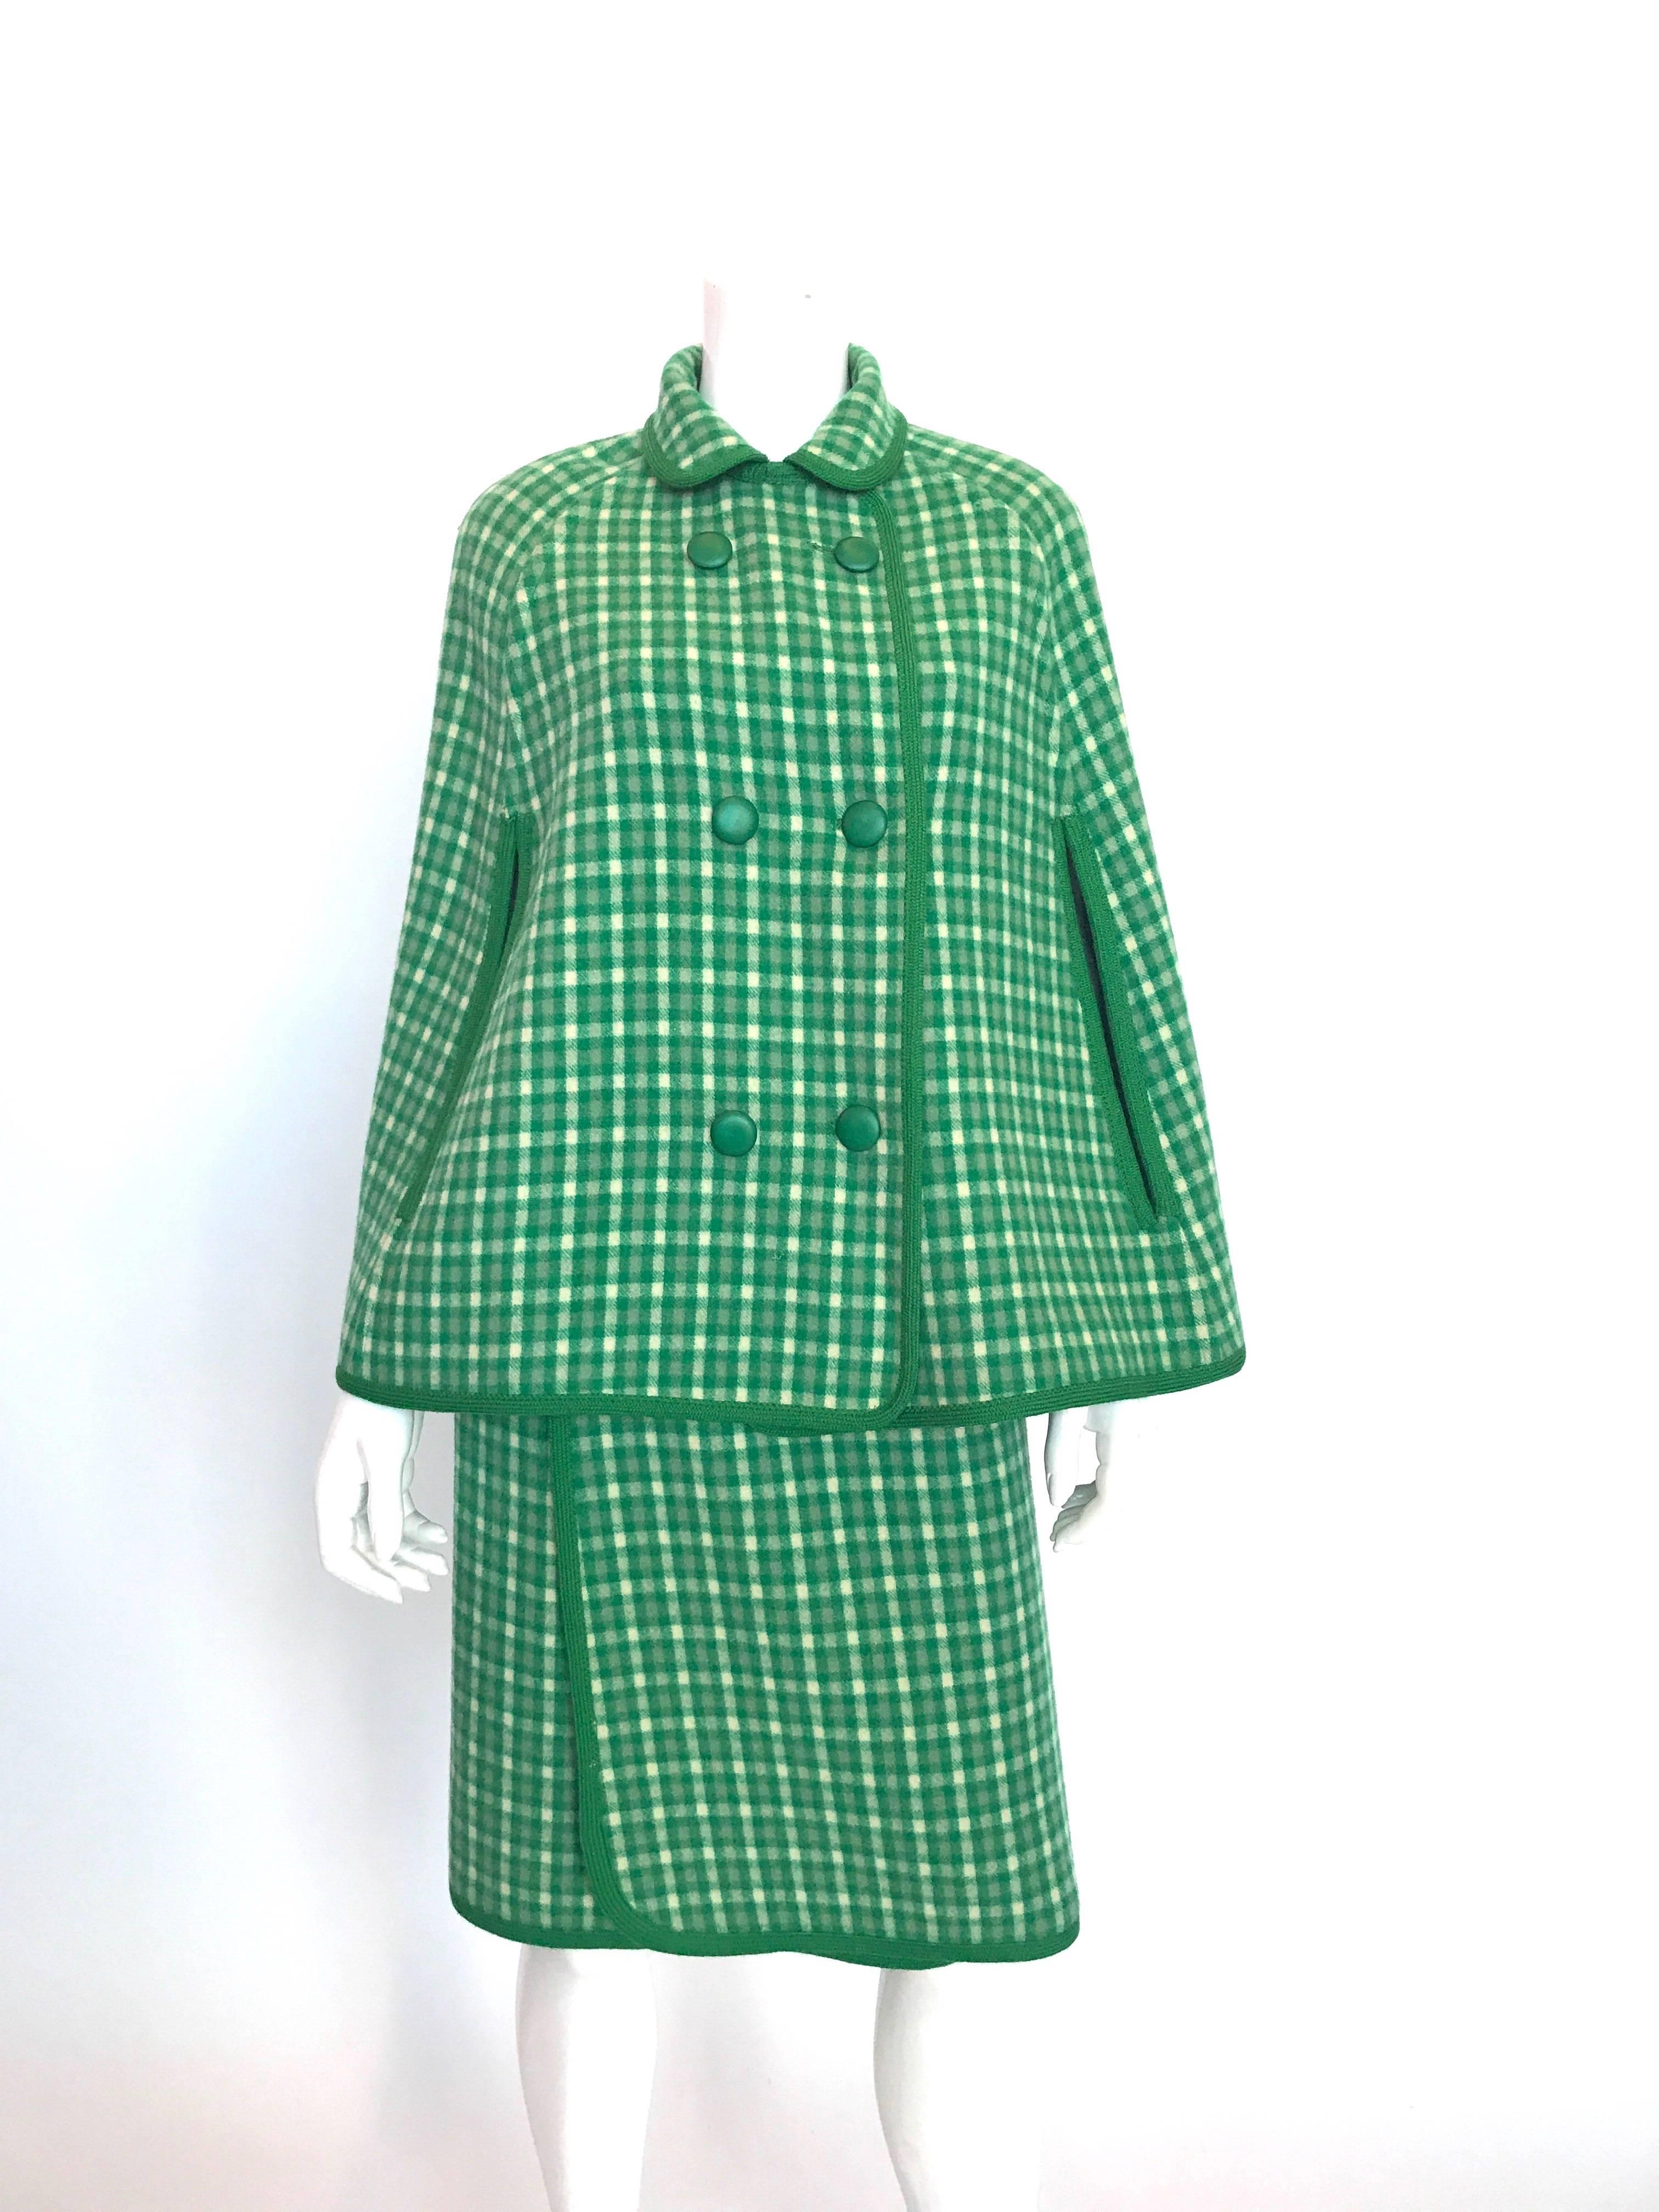 1960s Weatherall Green & White Check Reversable Wool Capelet & Skirt Set w/ Cap 
Very Mod.

True Kelly Green Color
Made in Great Britain
Size: N/A

Measurements (taken flat):
Capelet:
Shoulders (approx): 15.5